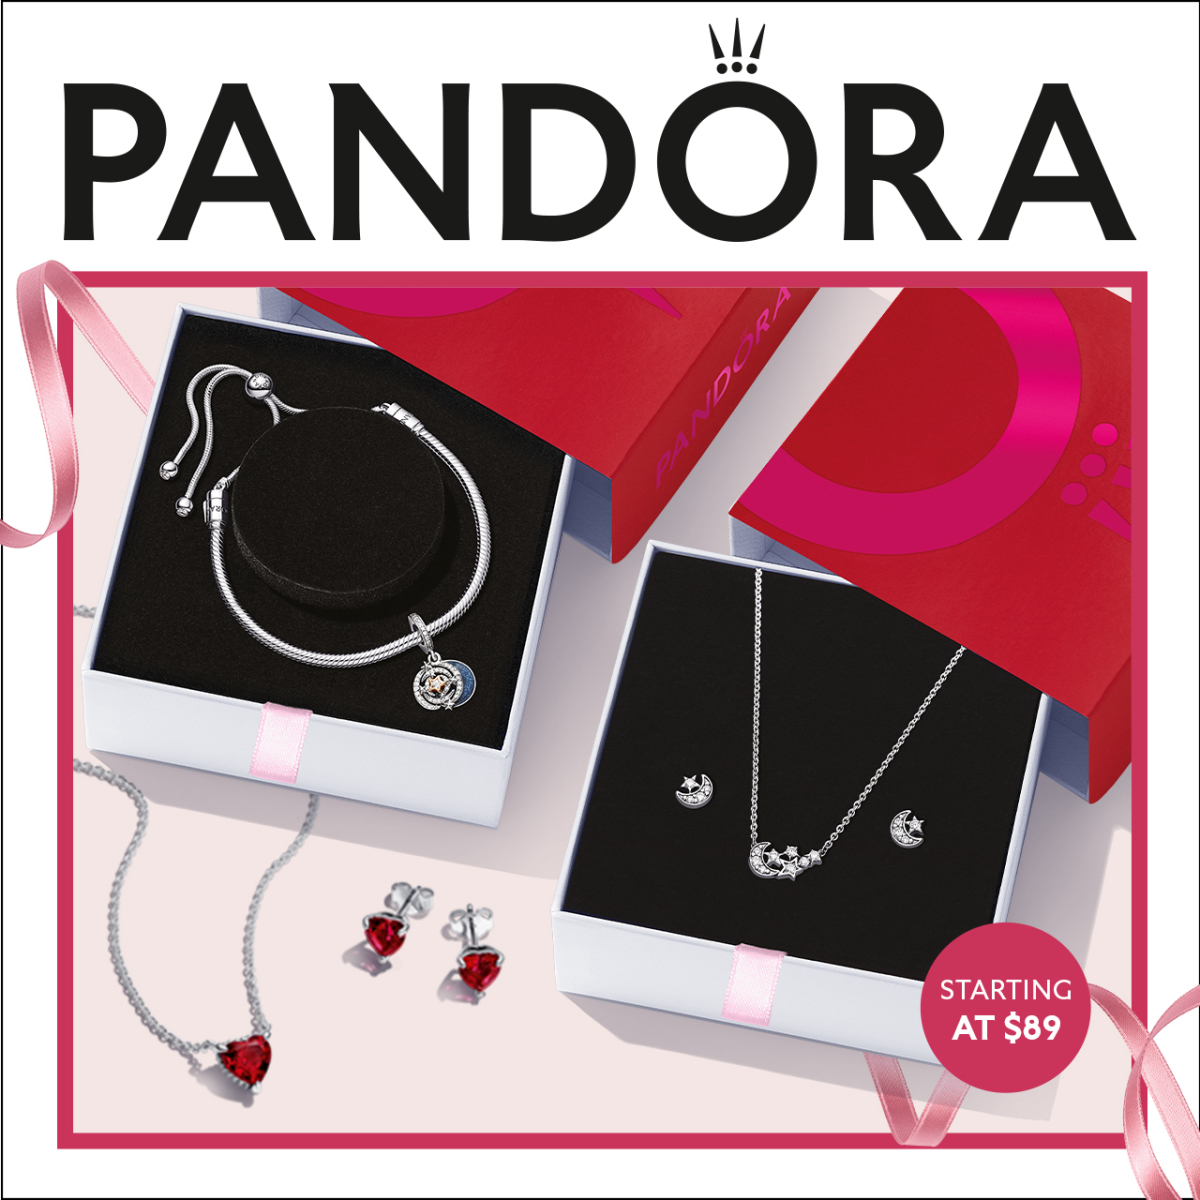 Pre-styled gift sets from PANDORA